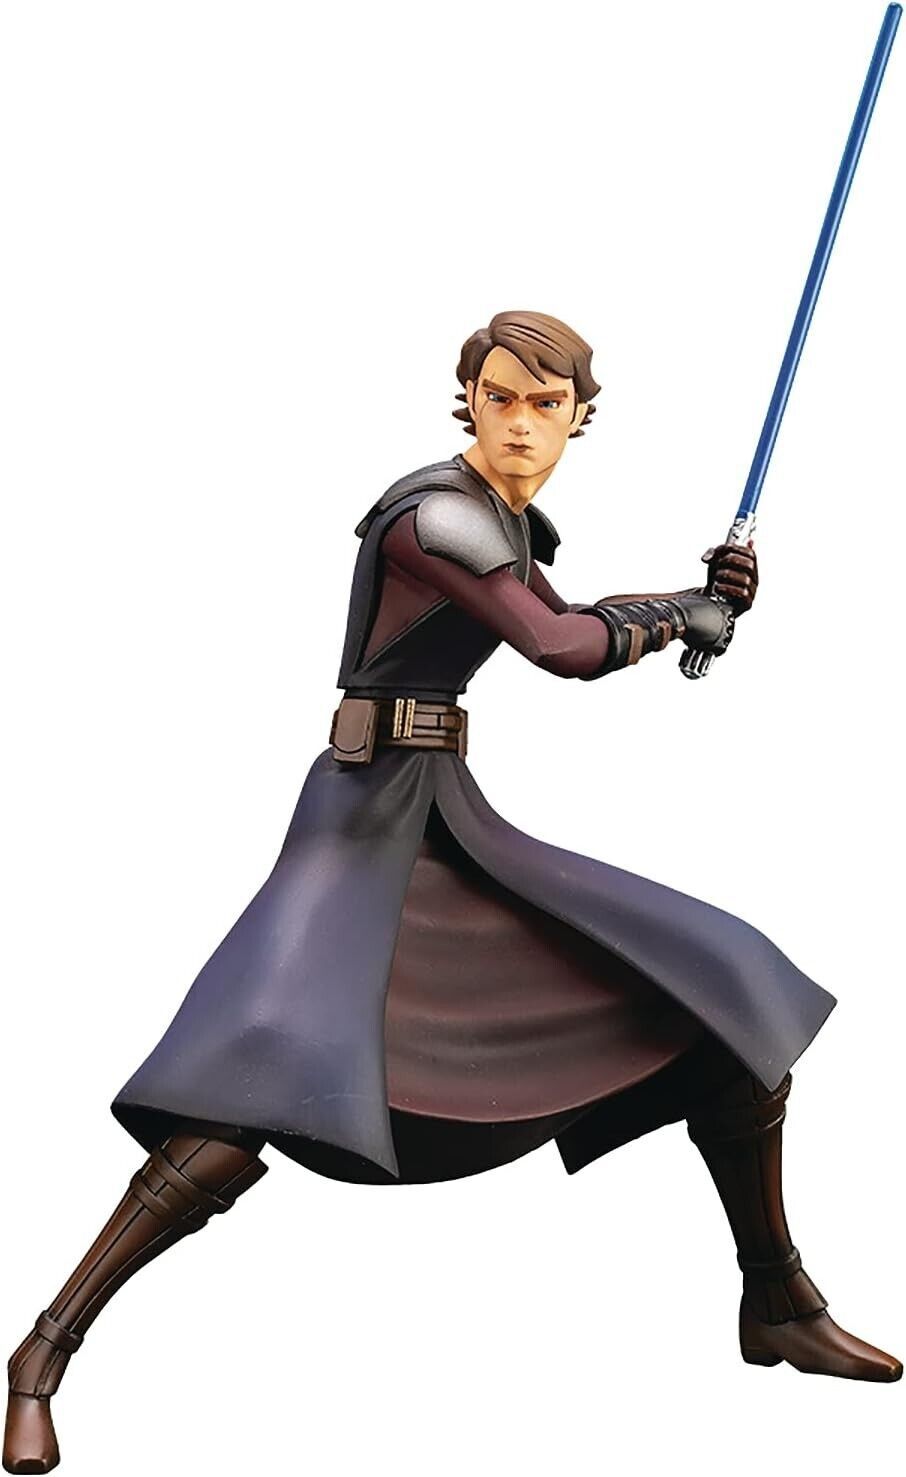 Primary image for Star Wars Anakin Skywalker The Clone Wars Figure ArtFX+ Statue NEW USA Seller